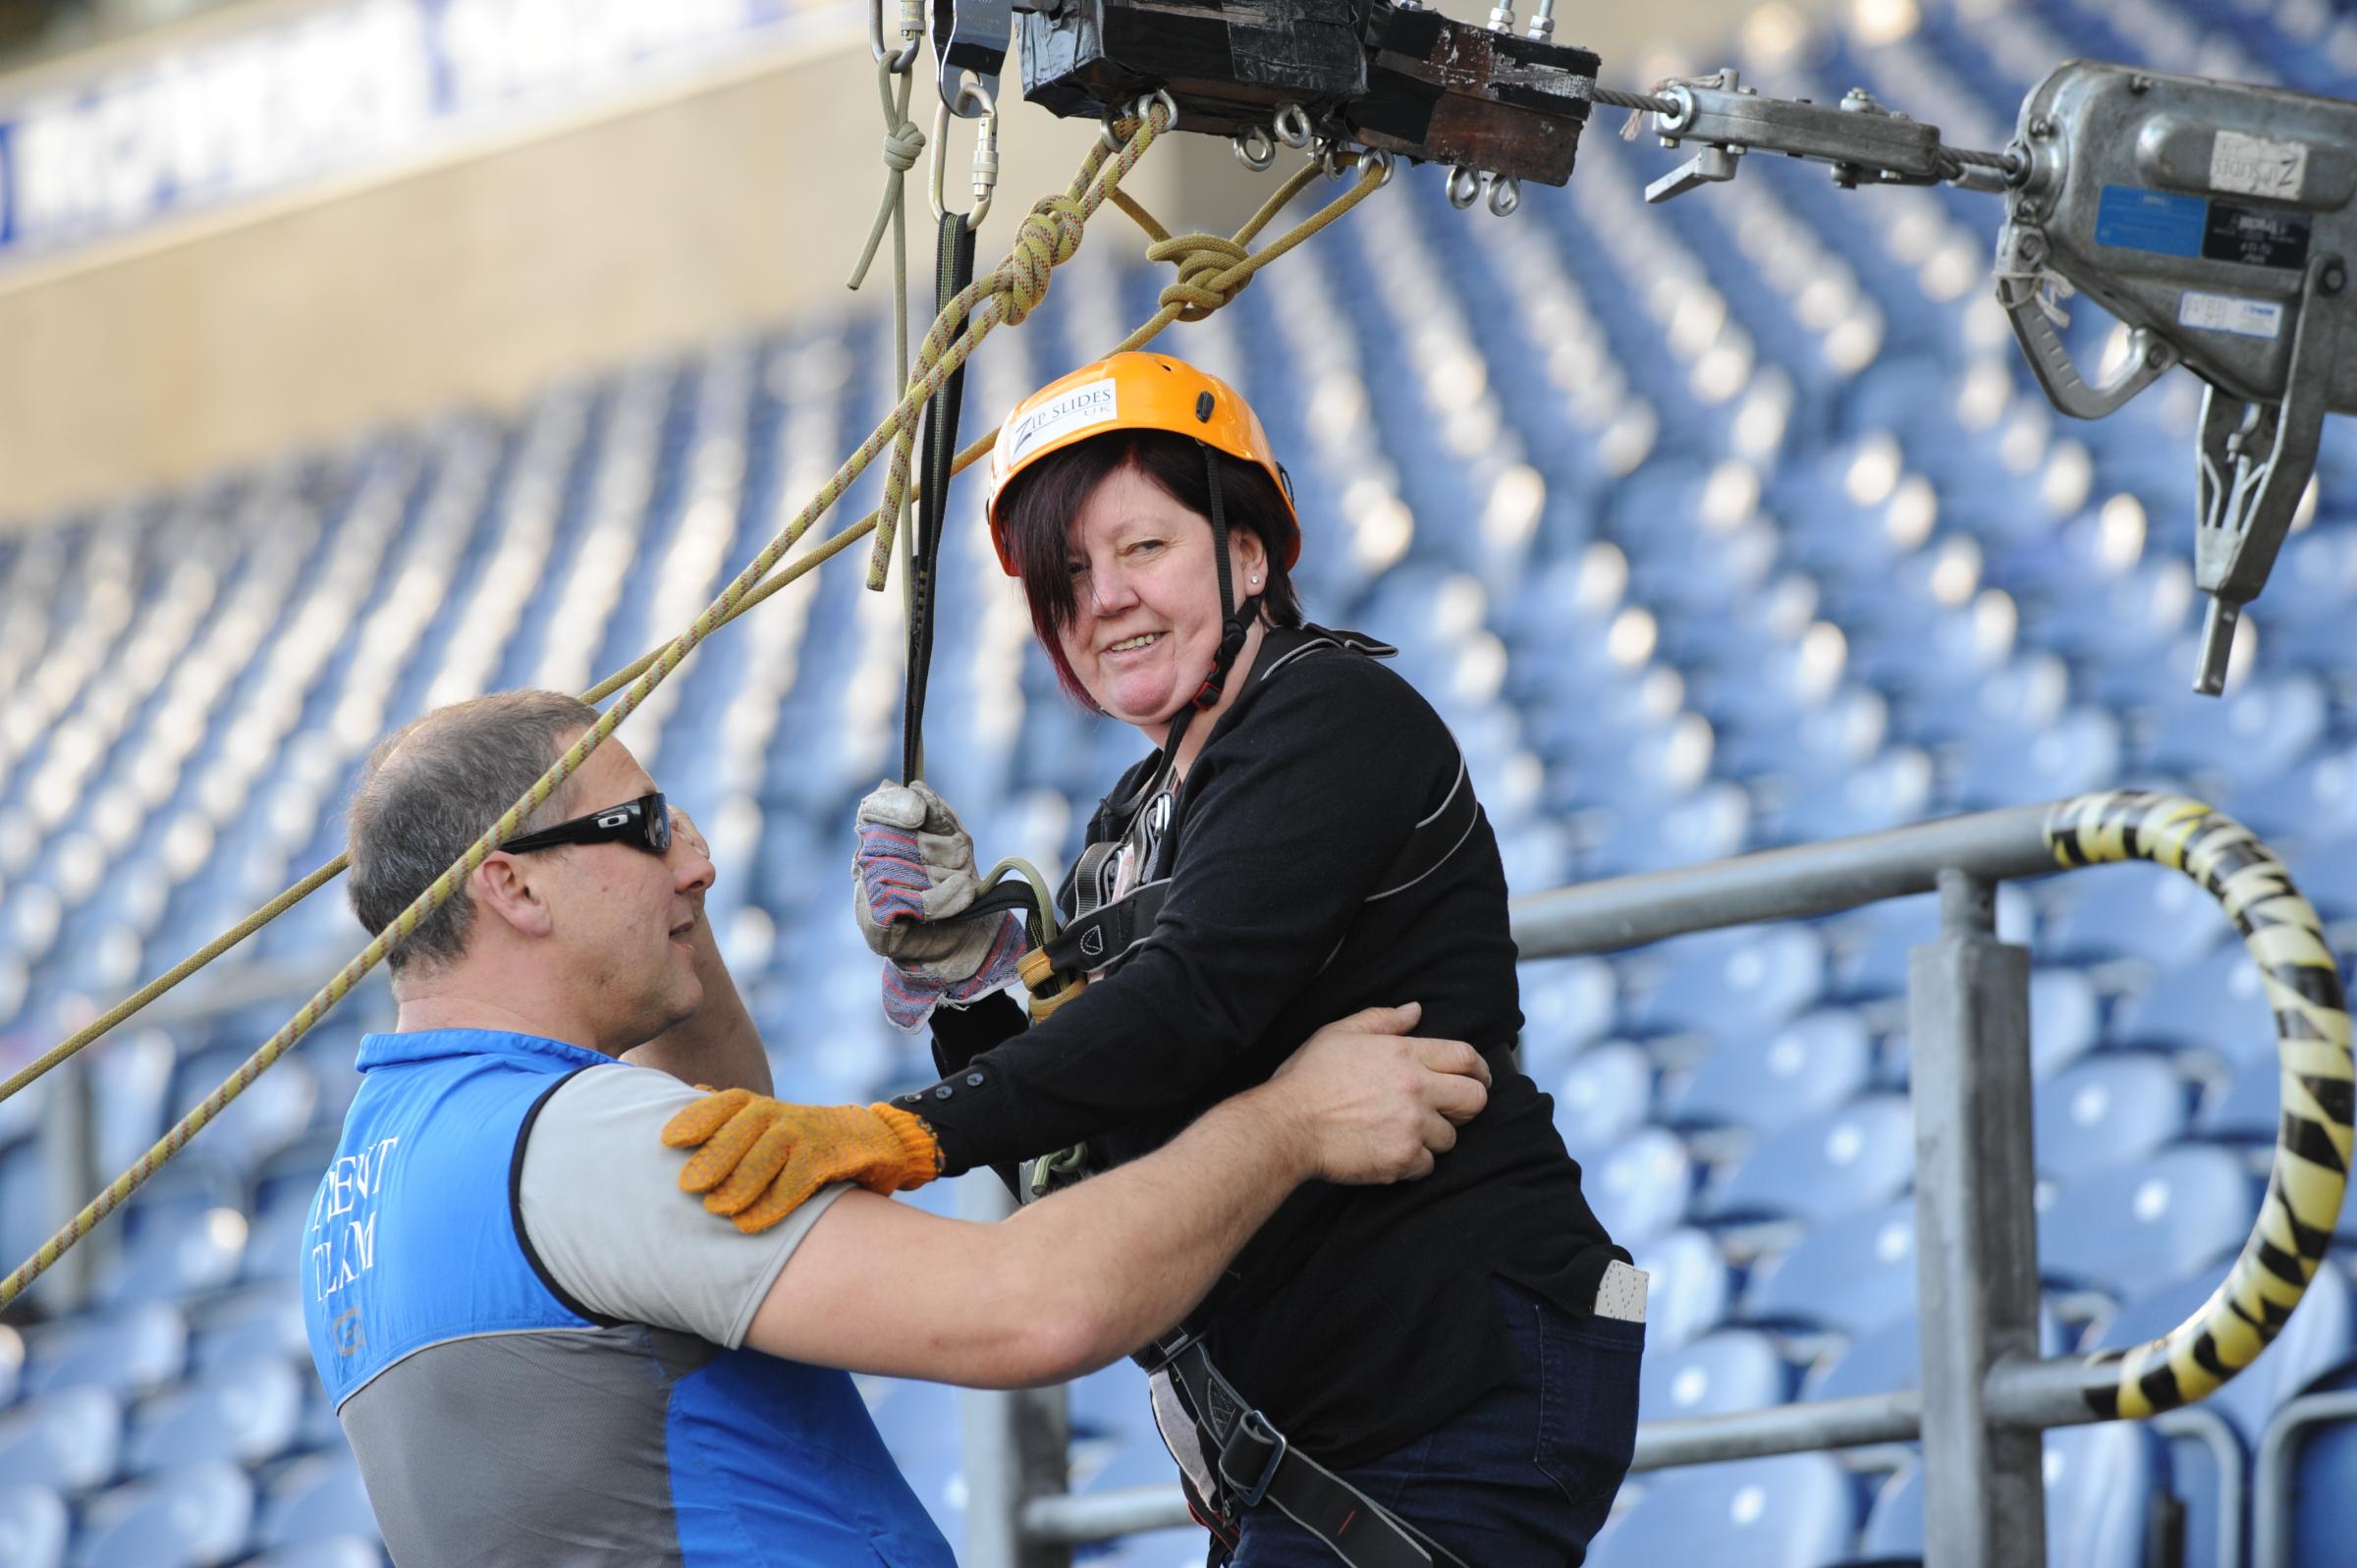 Mums’ zip wire Ewood Park challenge in aid of Blackburn Youth Zone